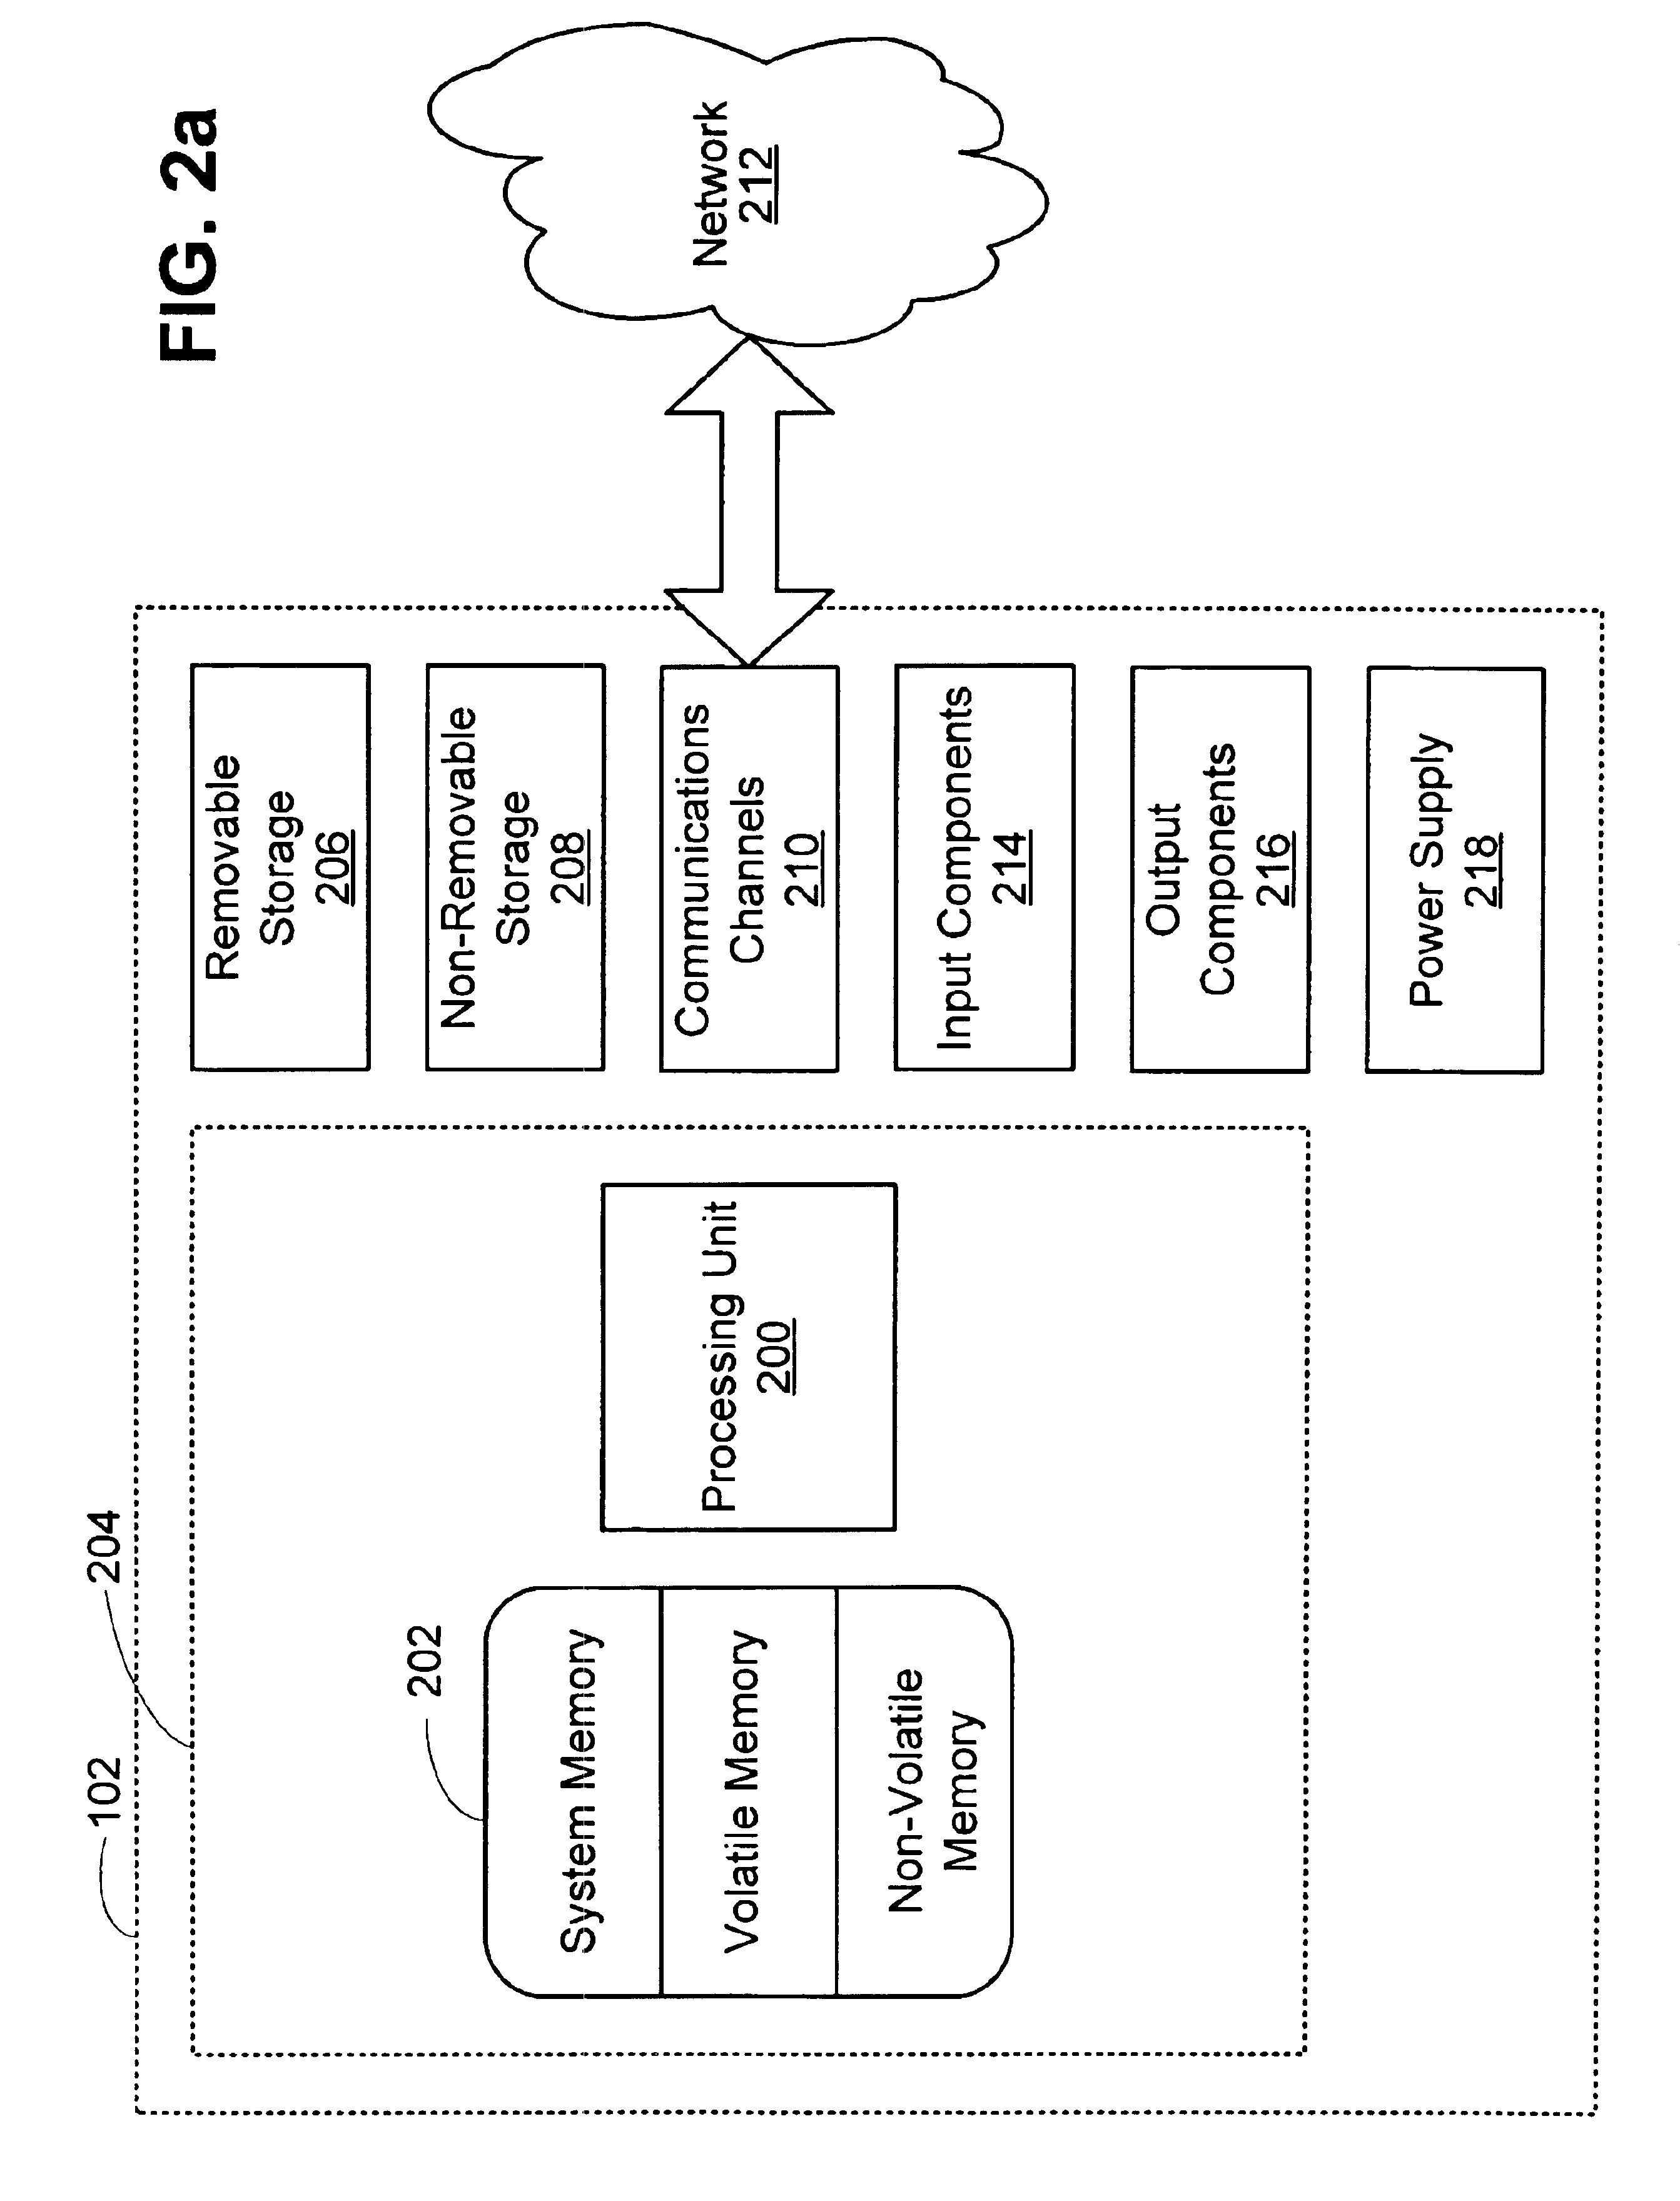 Method and system for using a keyboard overlay with a touch-sensitive display screen